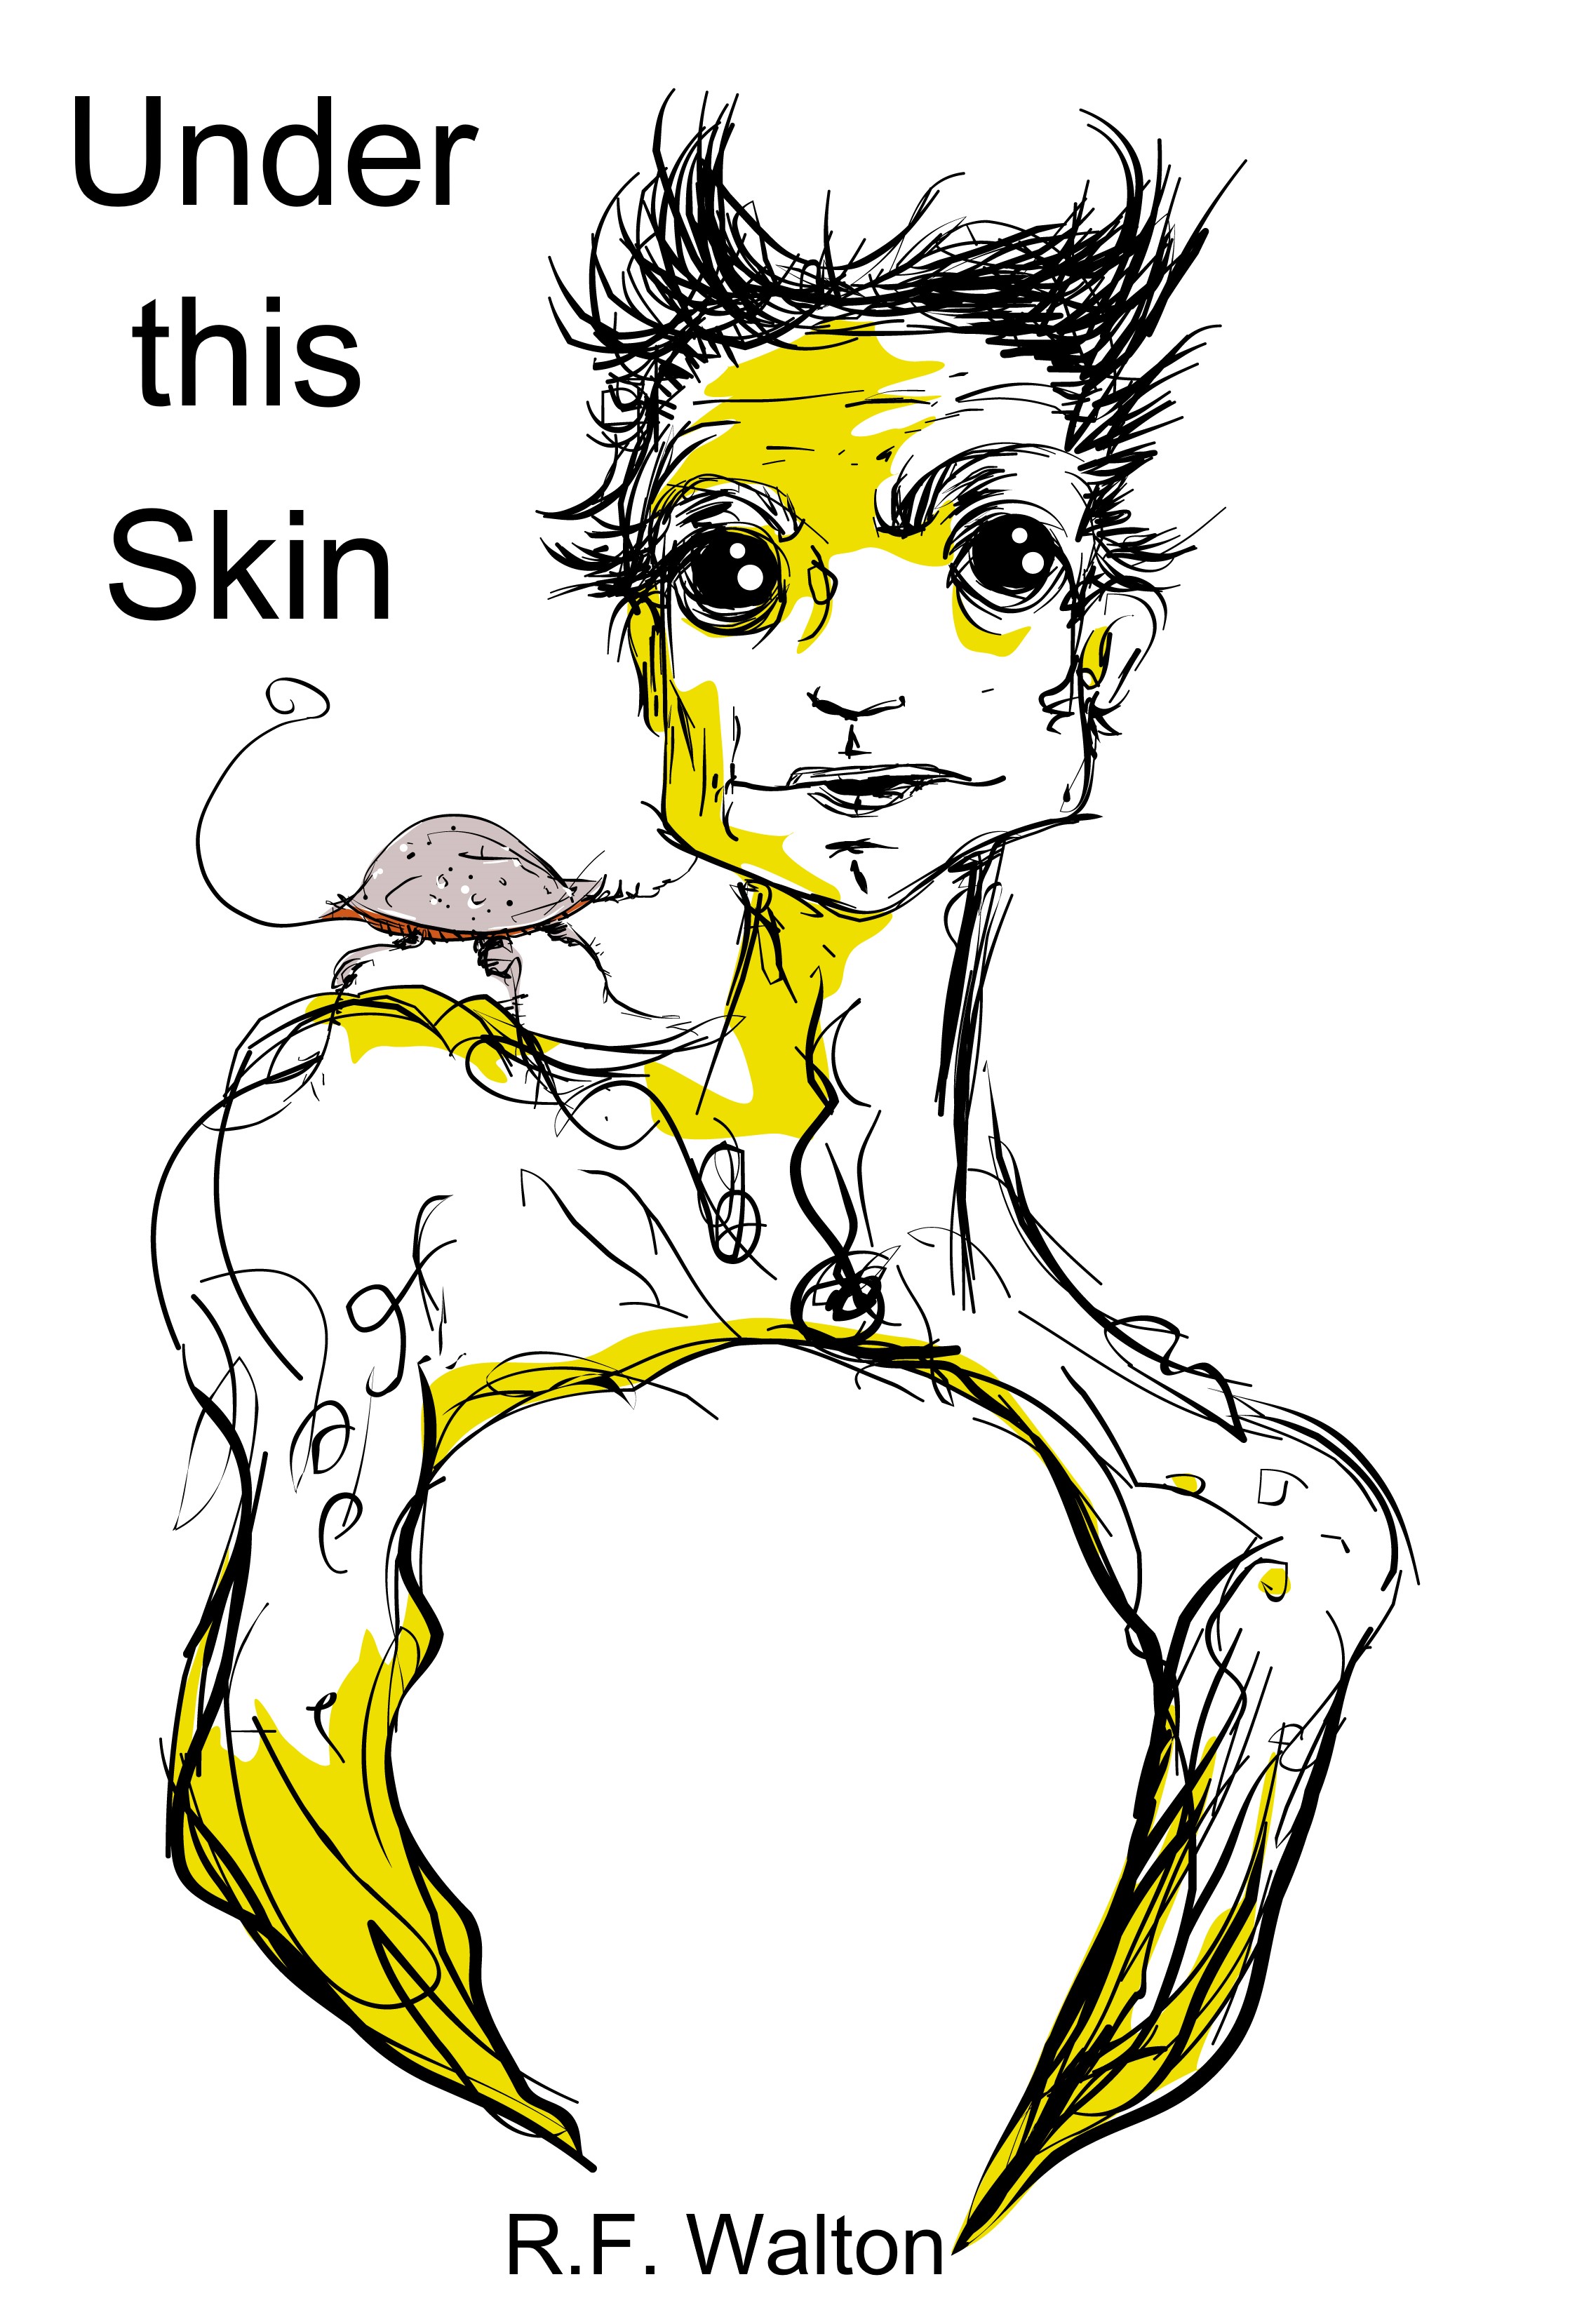 Image of Under this Skin book cover